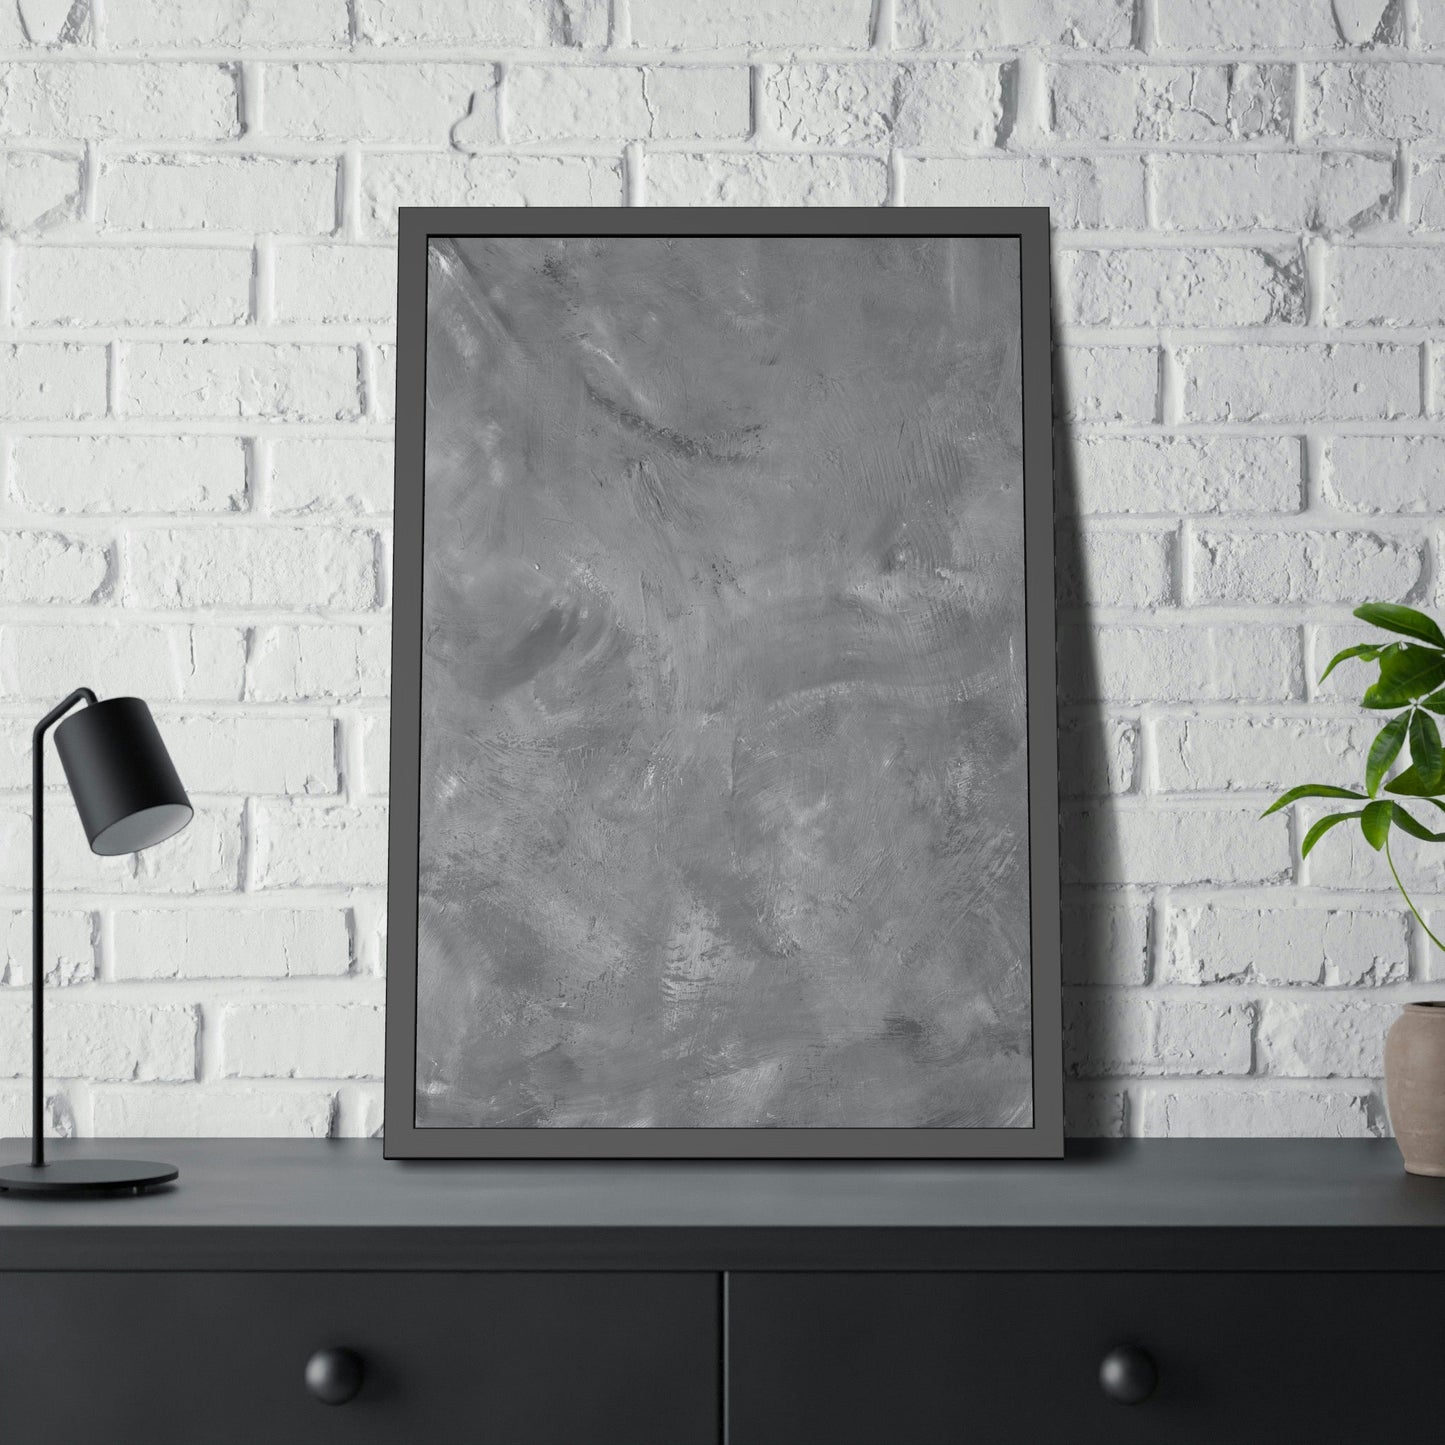 Mysterious Gray: Framed Poster for a Subtle Touch of Drama